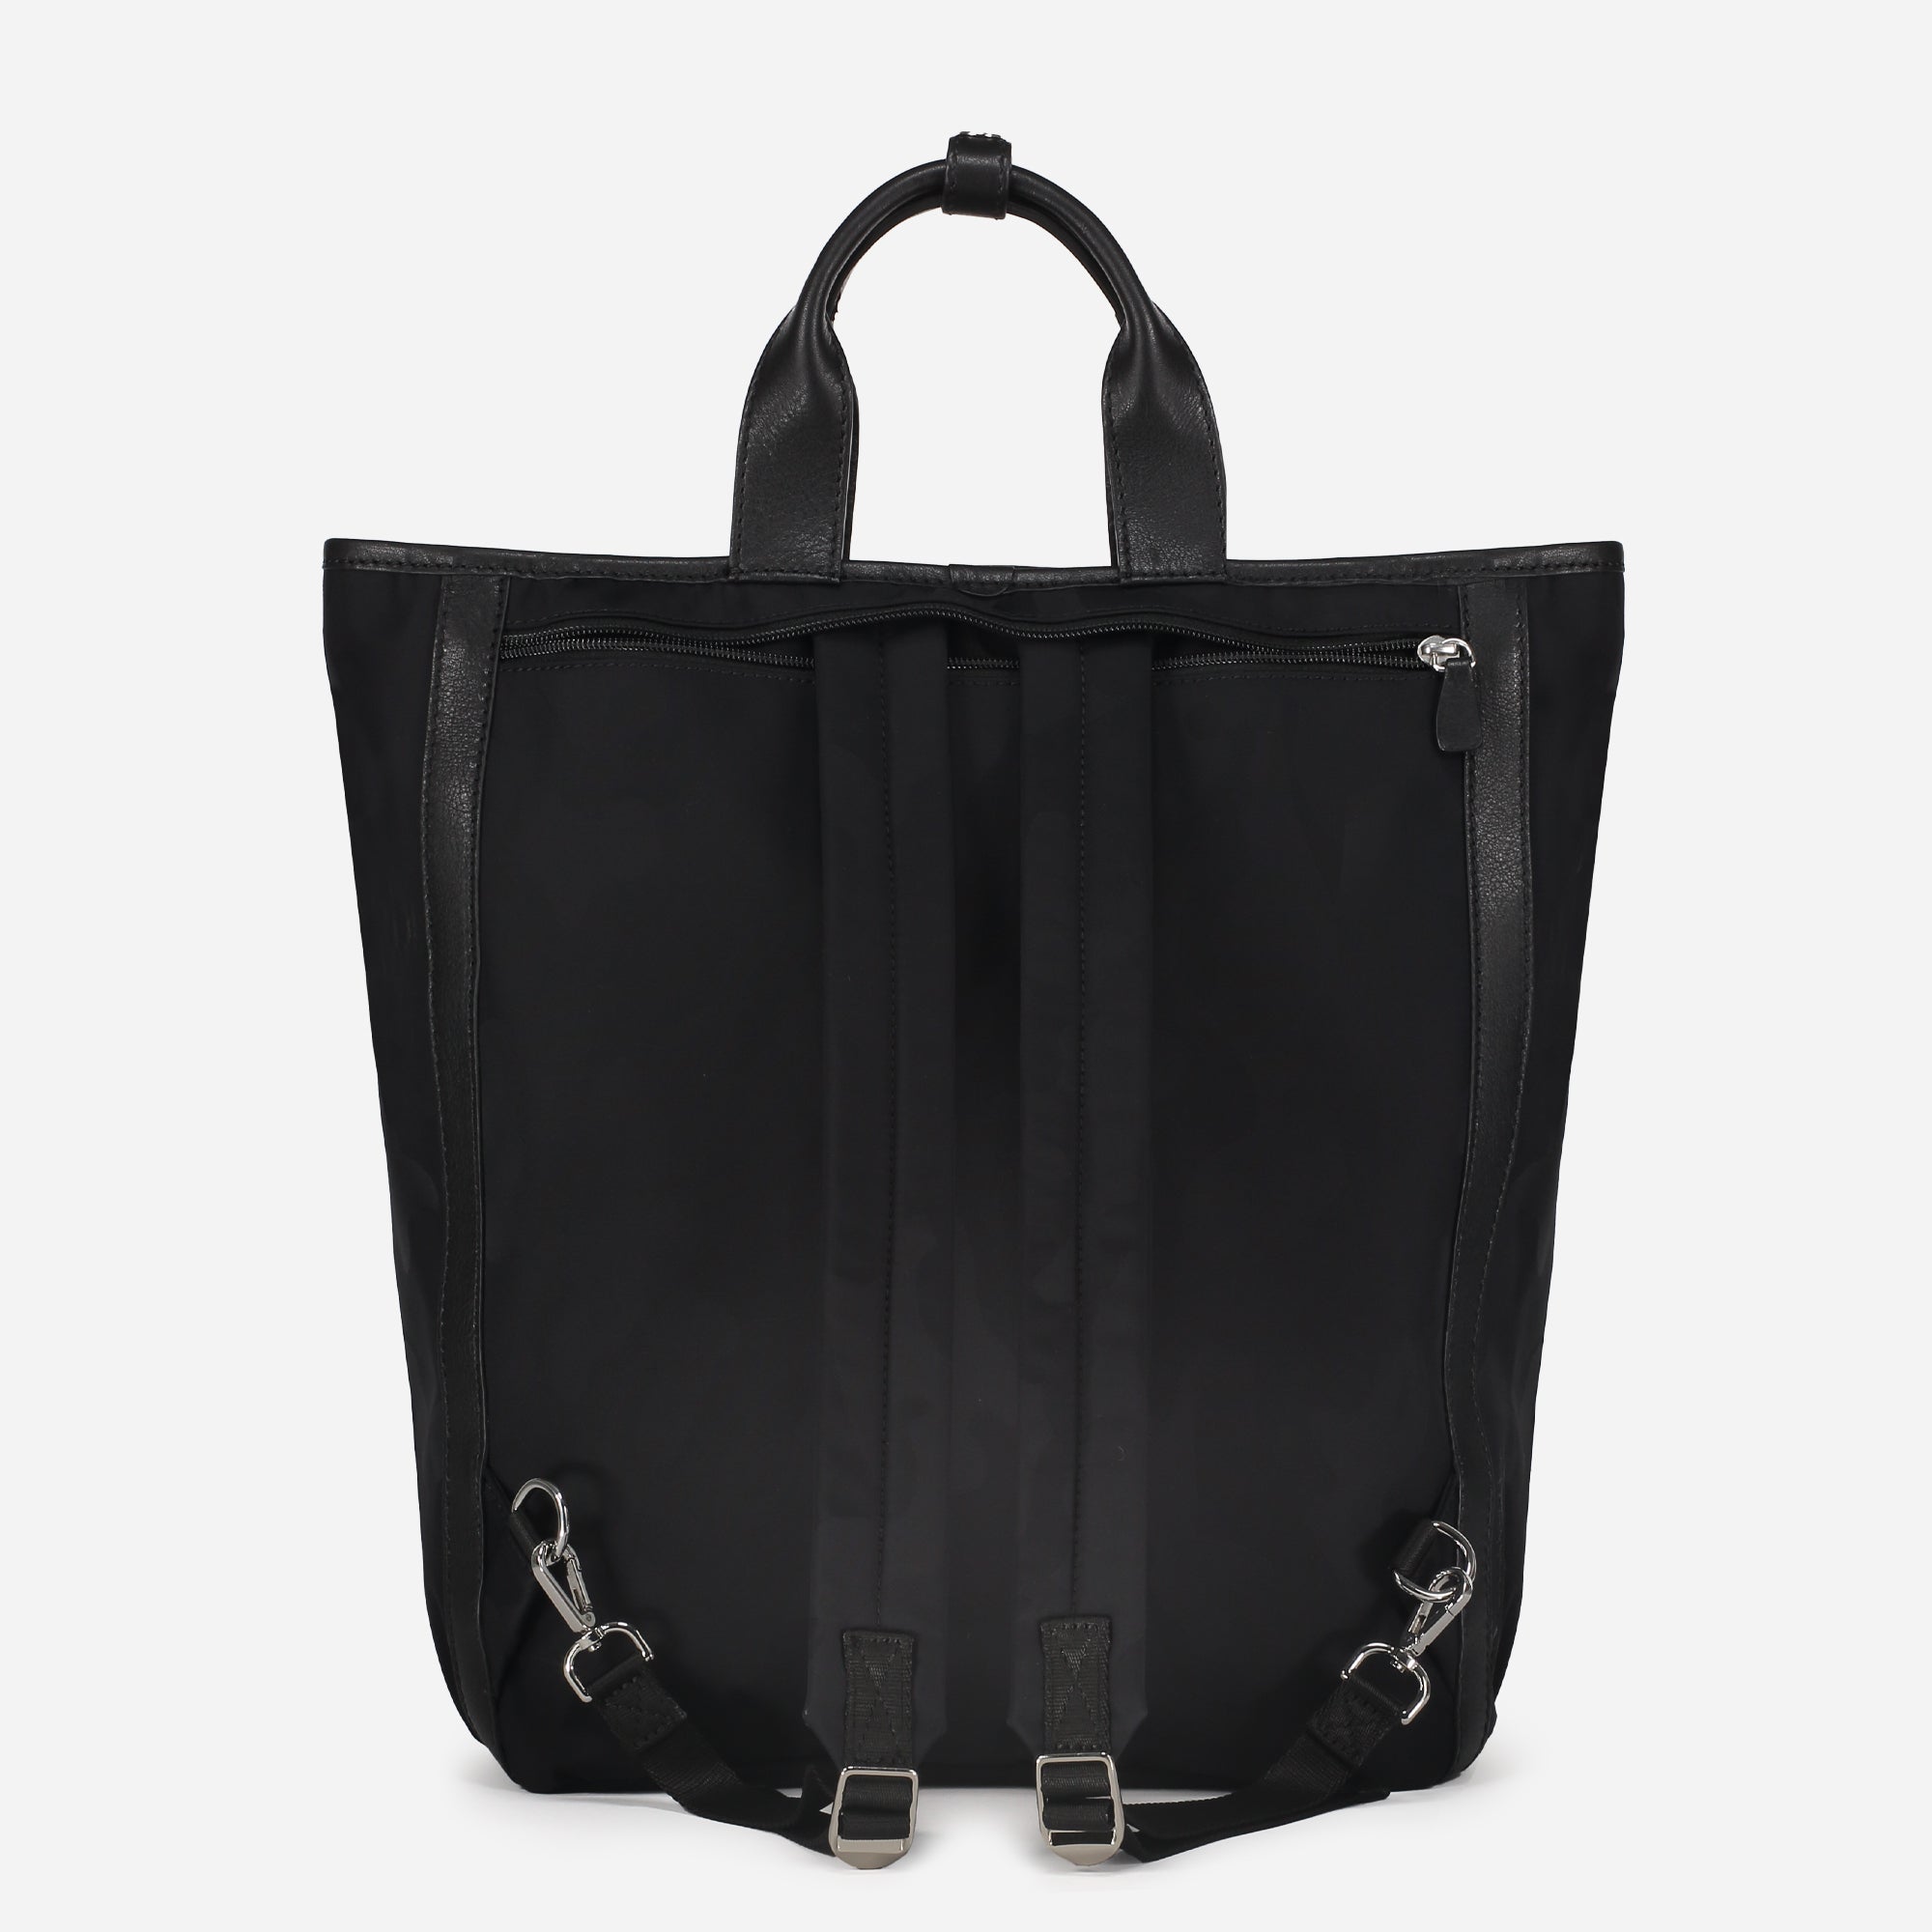 335 – BACKPACK<br> Nylon and Calfskin leather